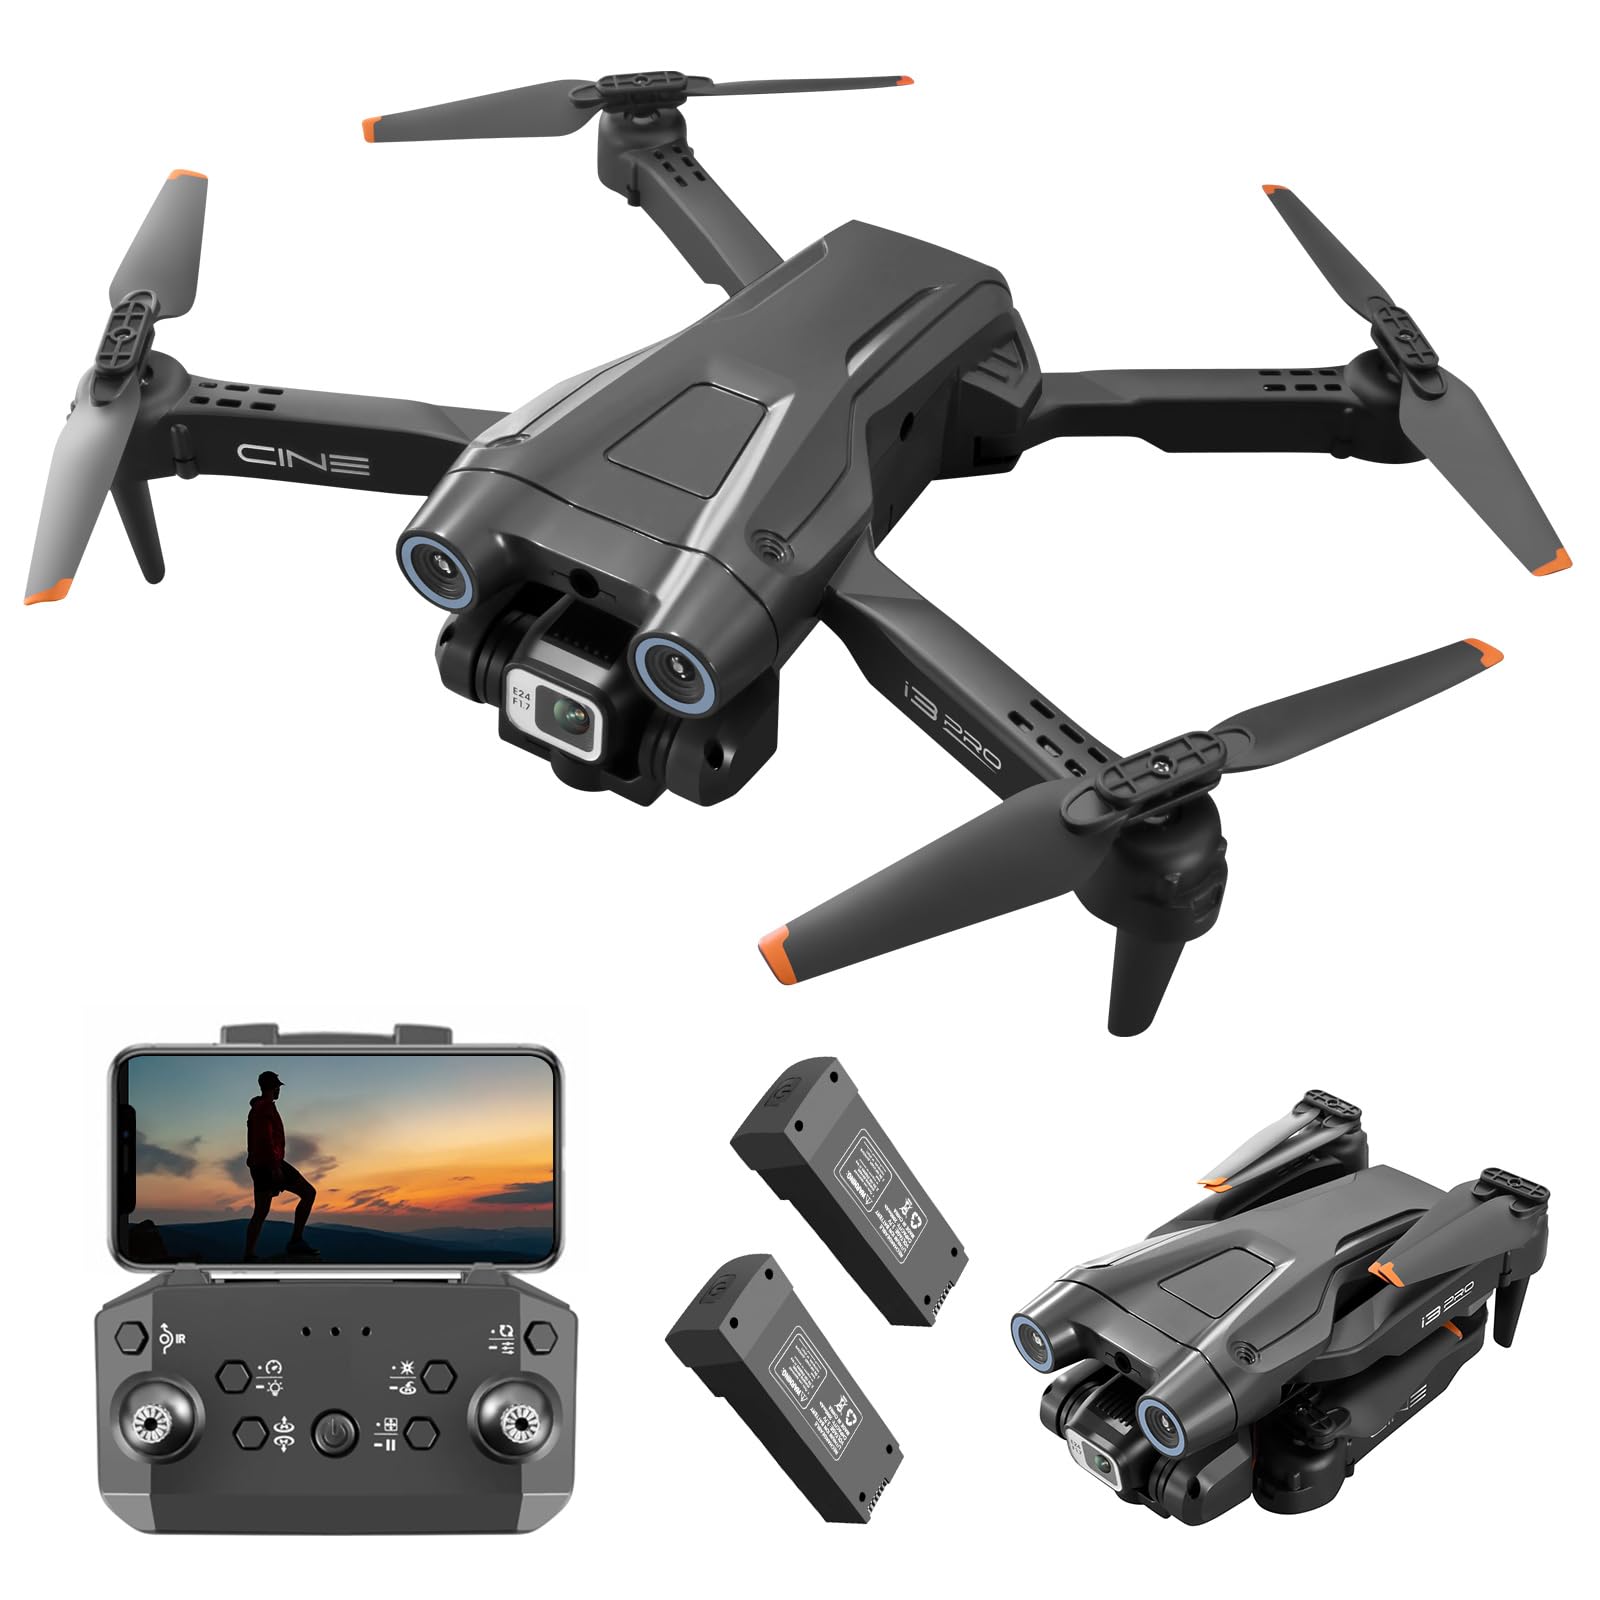 Drone for Kids Adults, RC Quadcopter with 1080P HD FPV Camera for Beginners, Foldable Mini Drone with Obstacle Avoidance, Headless Mode, One Key Take Off/Landing, Speed Adjustment, 3D Flips, 2 Batteries